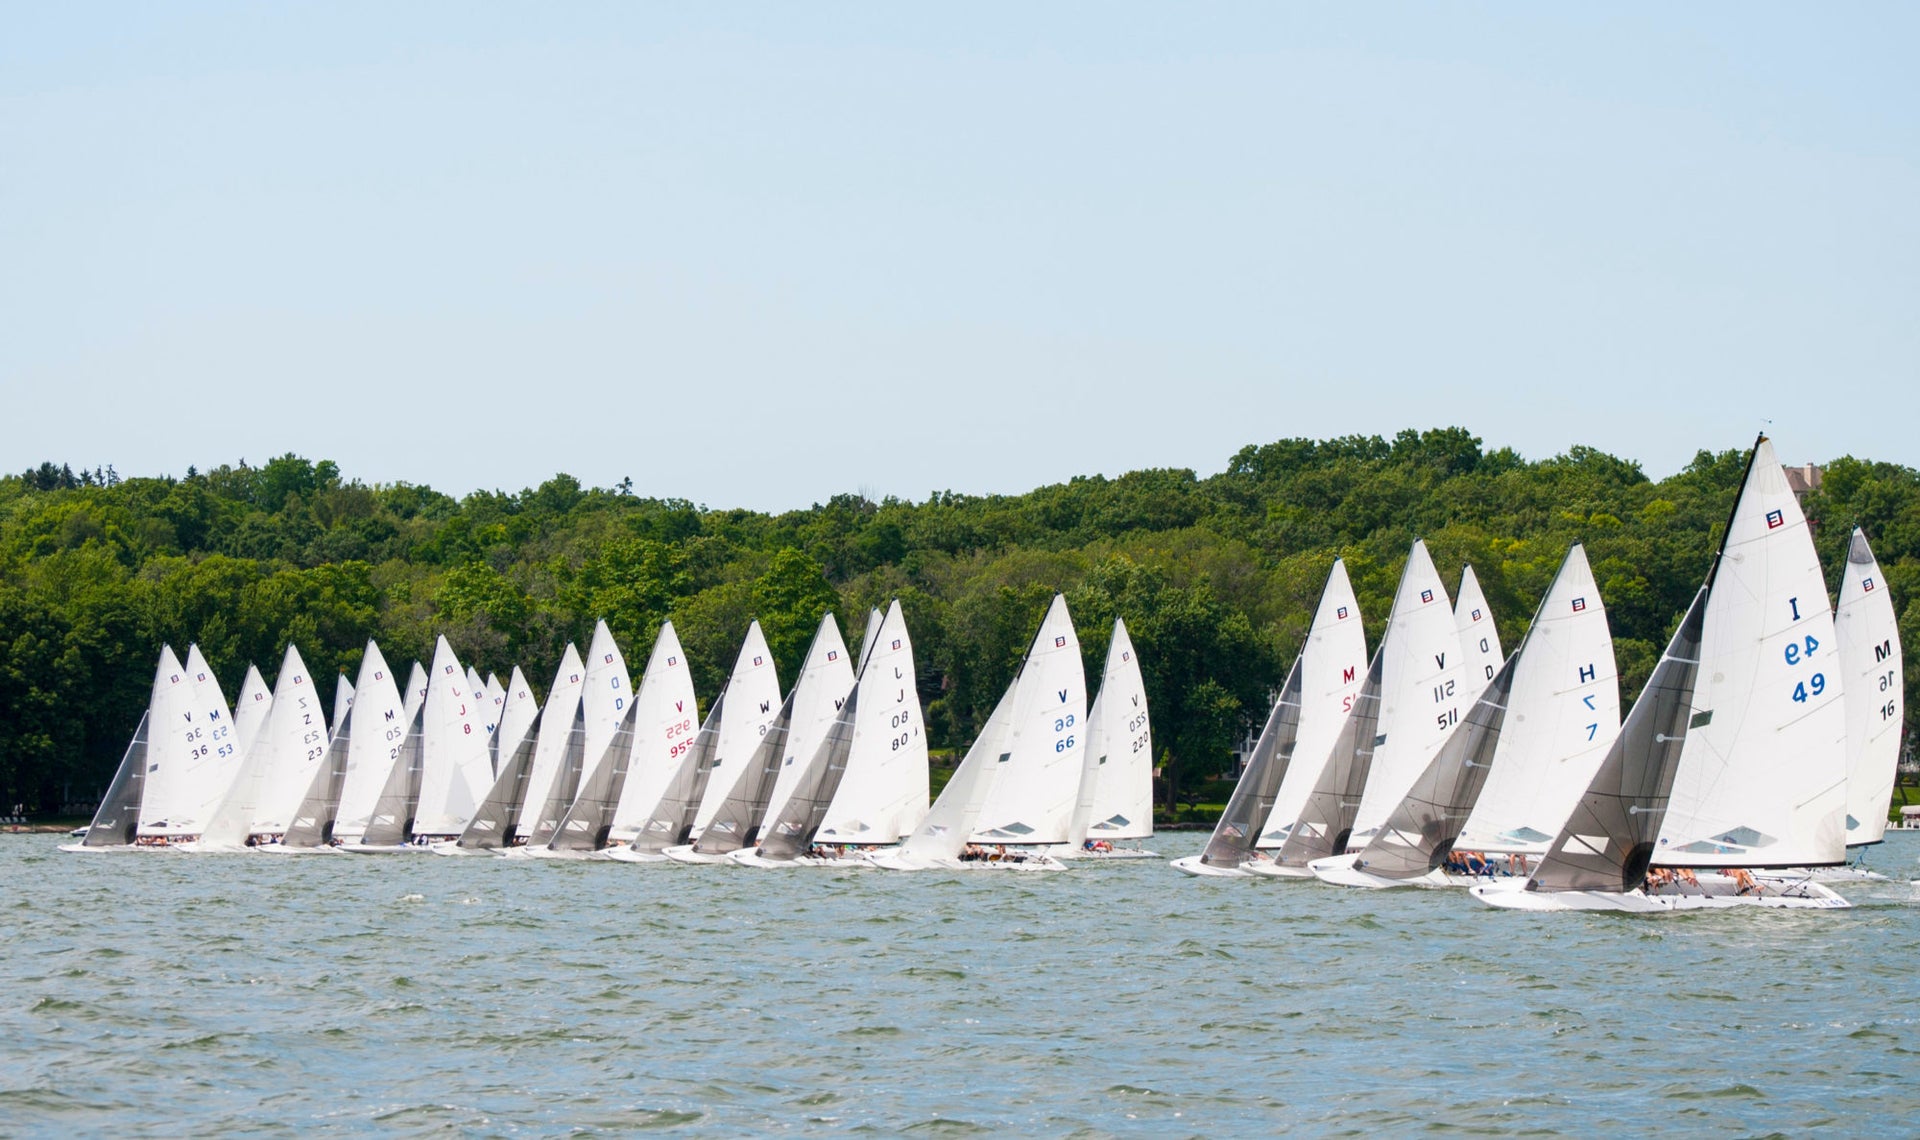 North Sails Continues Their Support of Scow One Design Classes